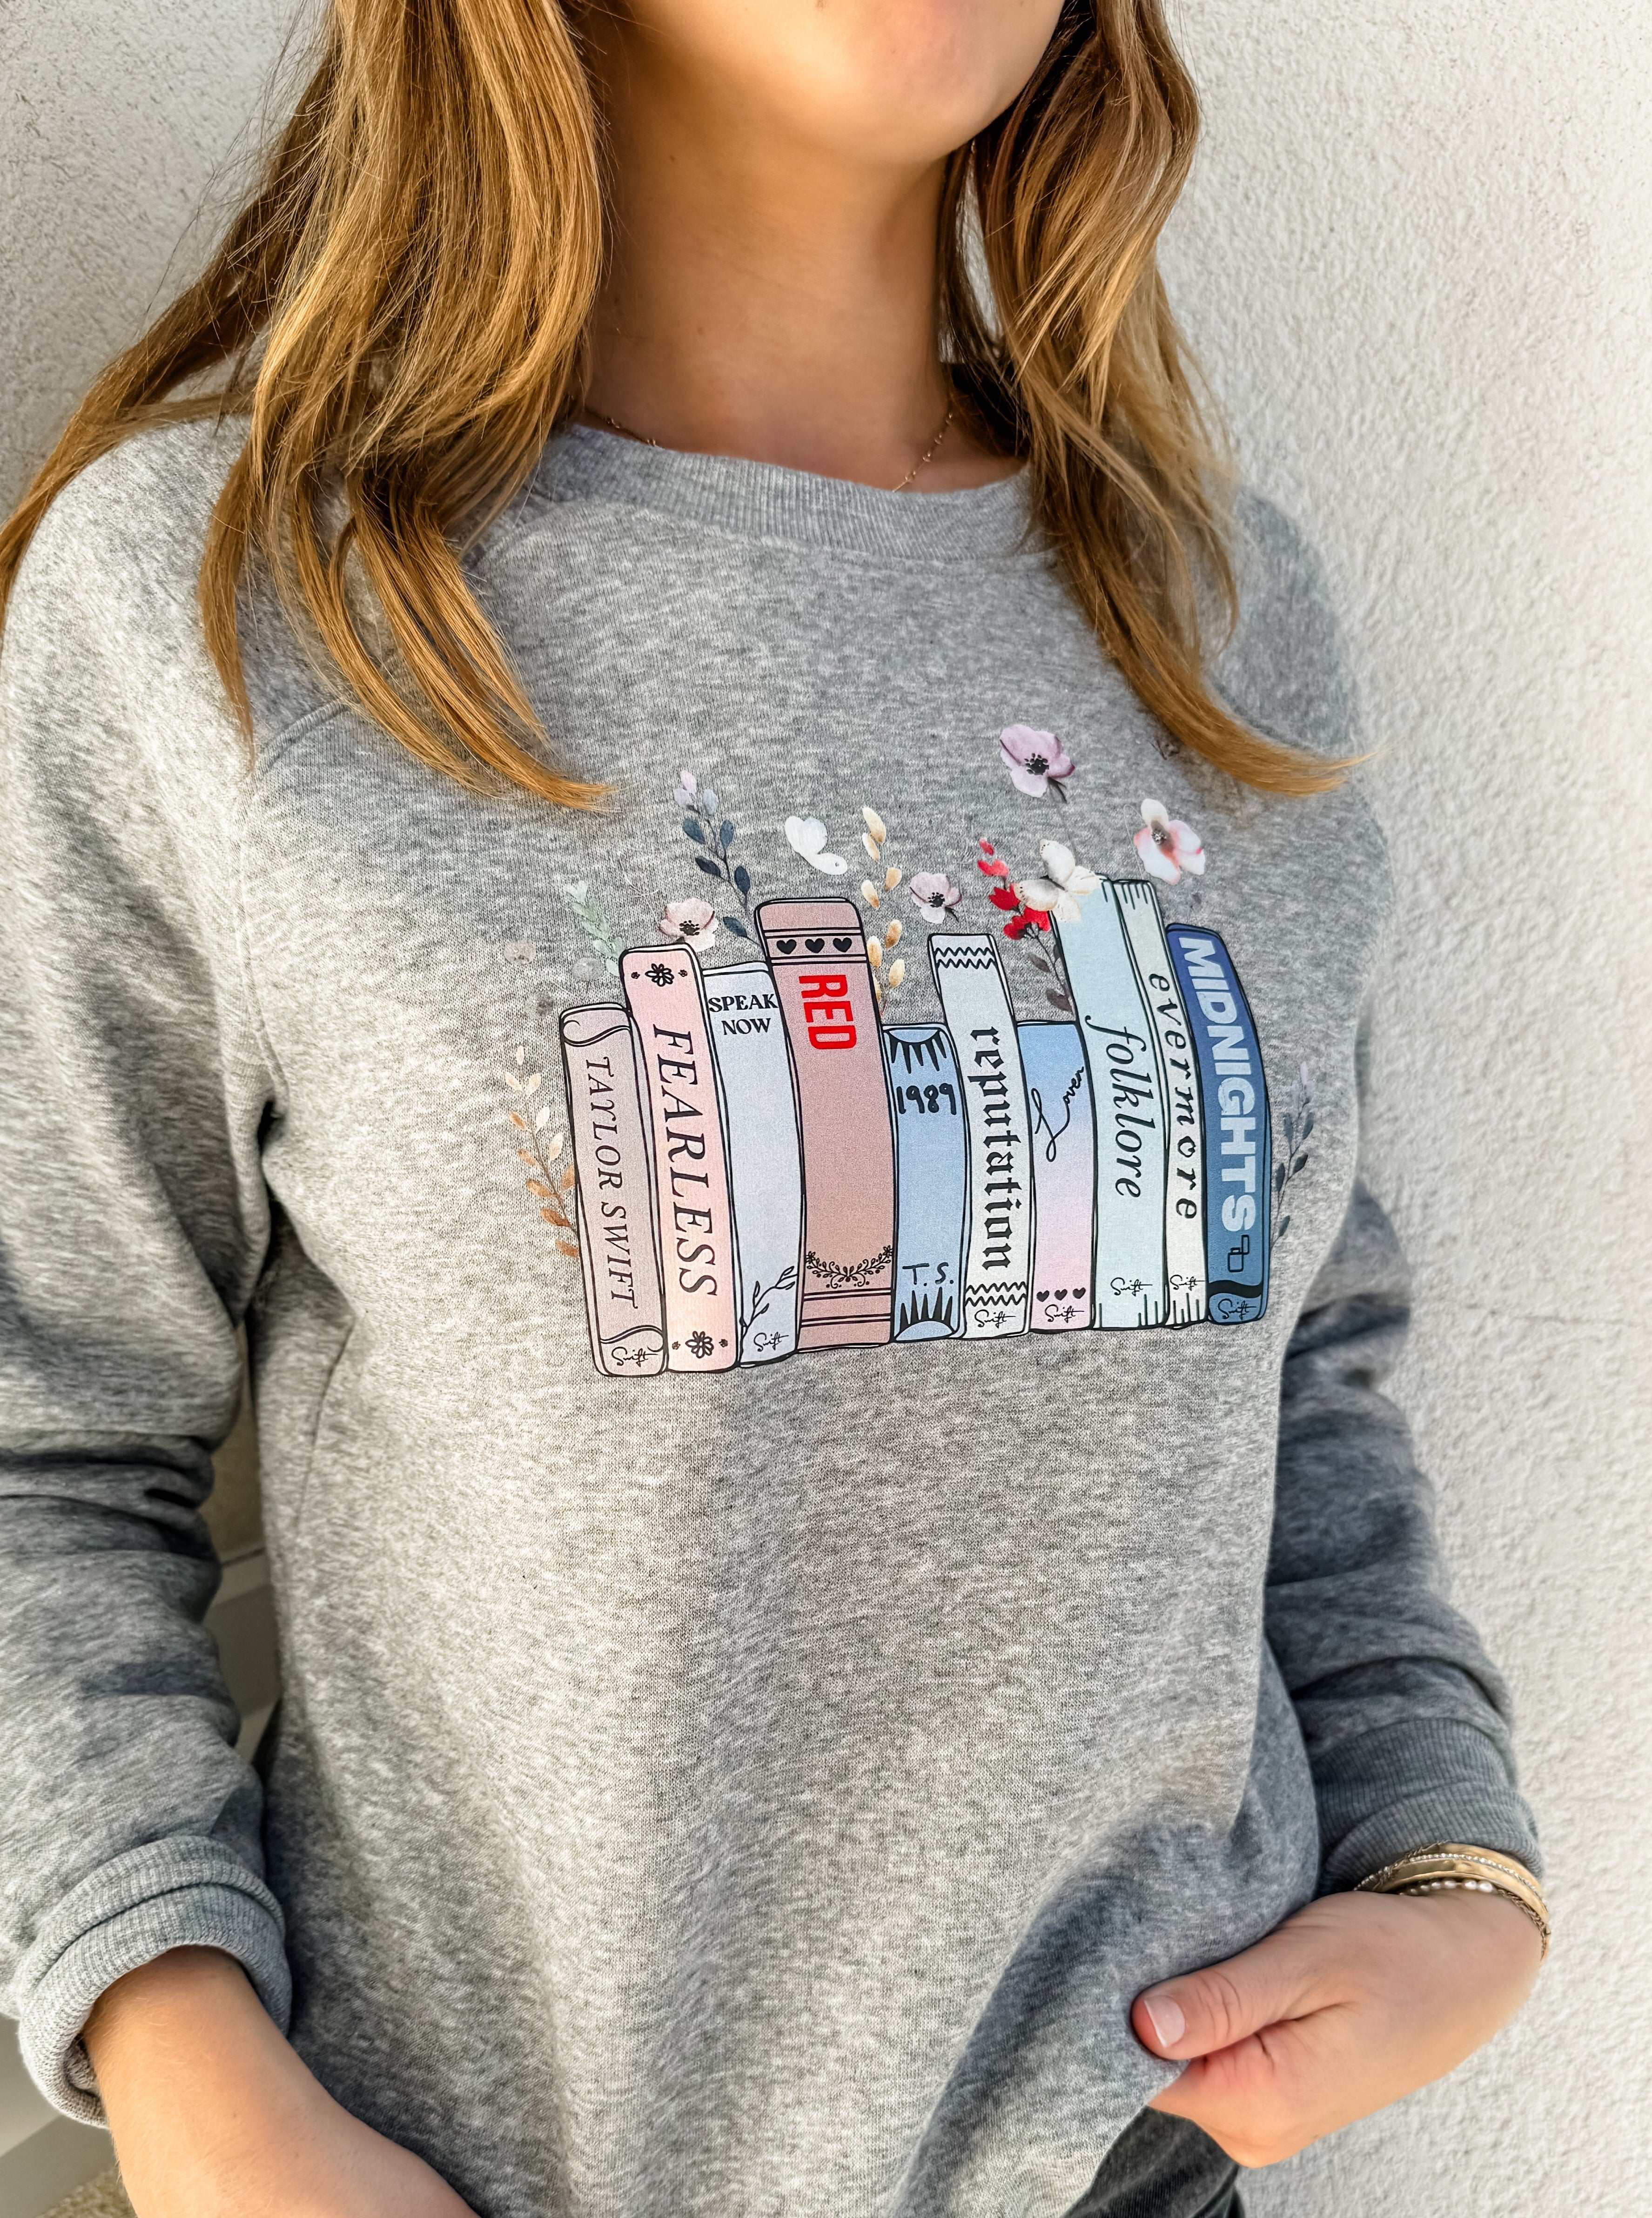 Whimsical Taylor Album Books with Flowers Sweatshirt